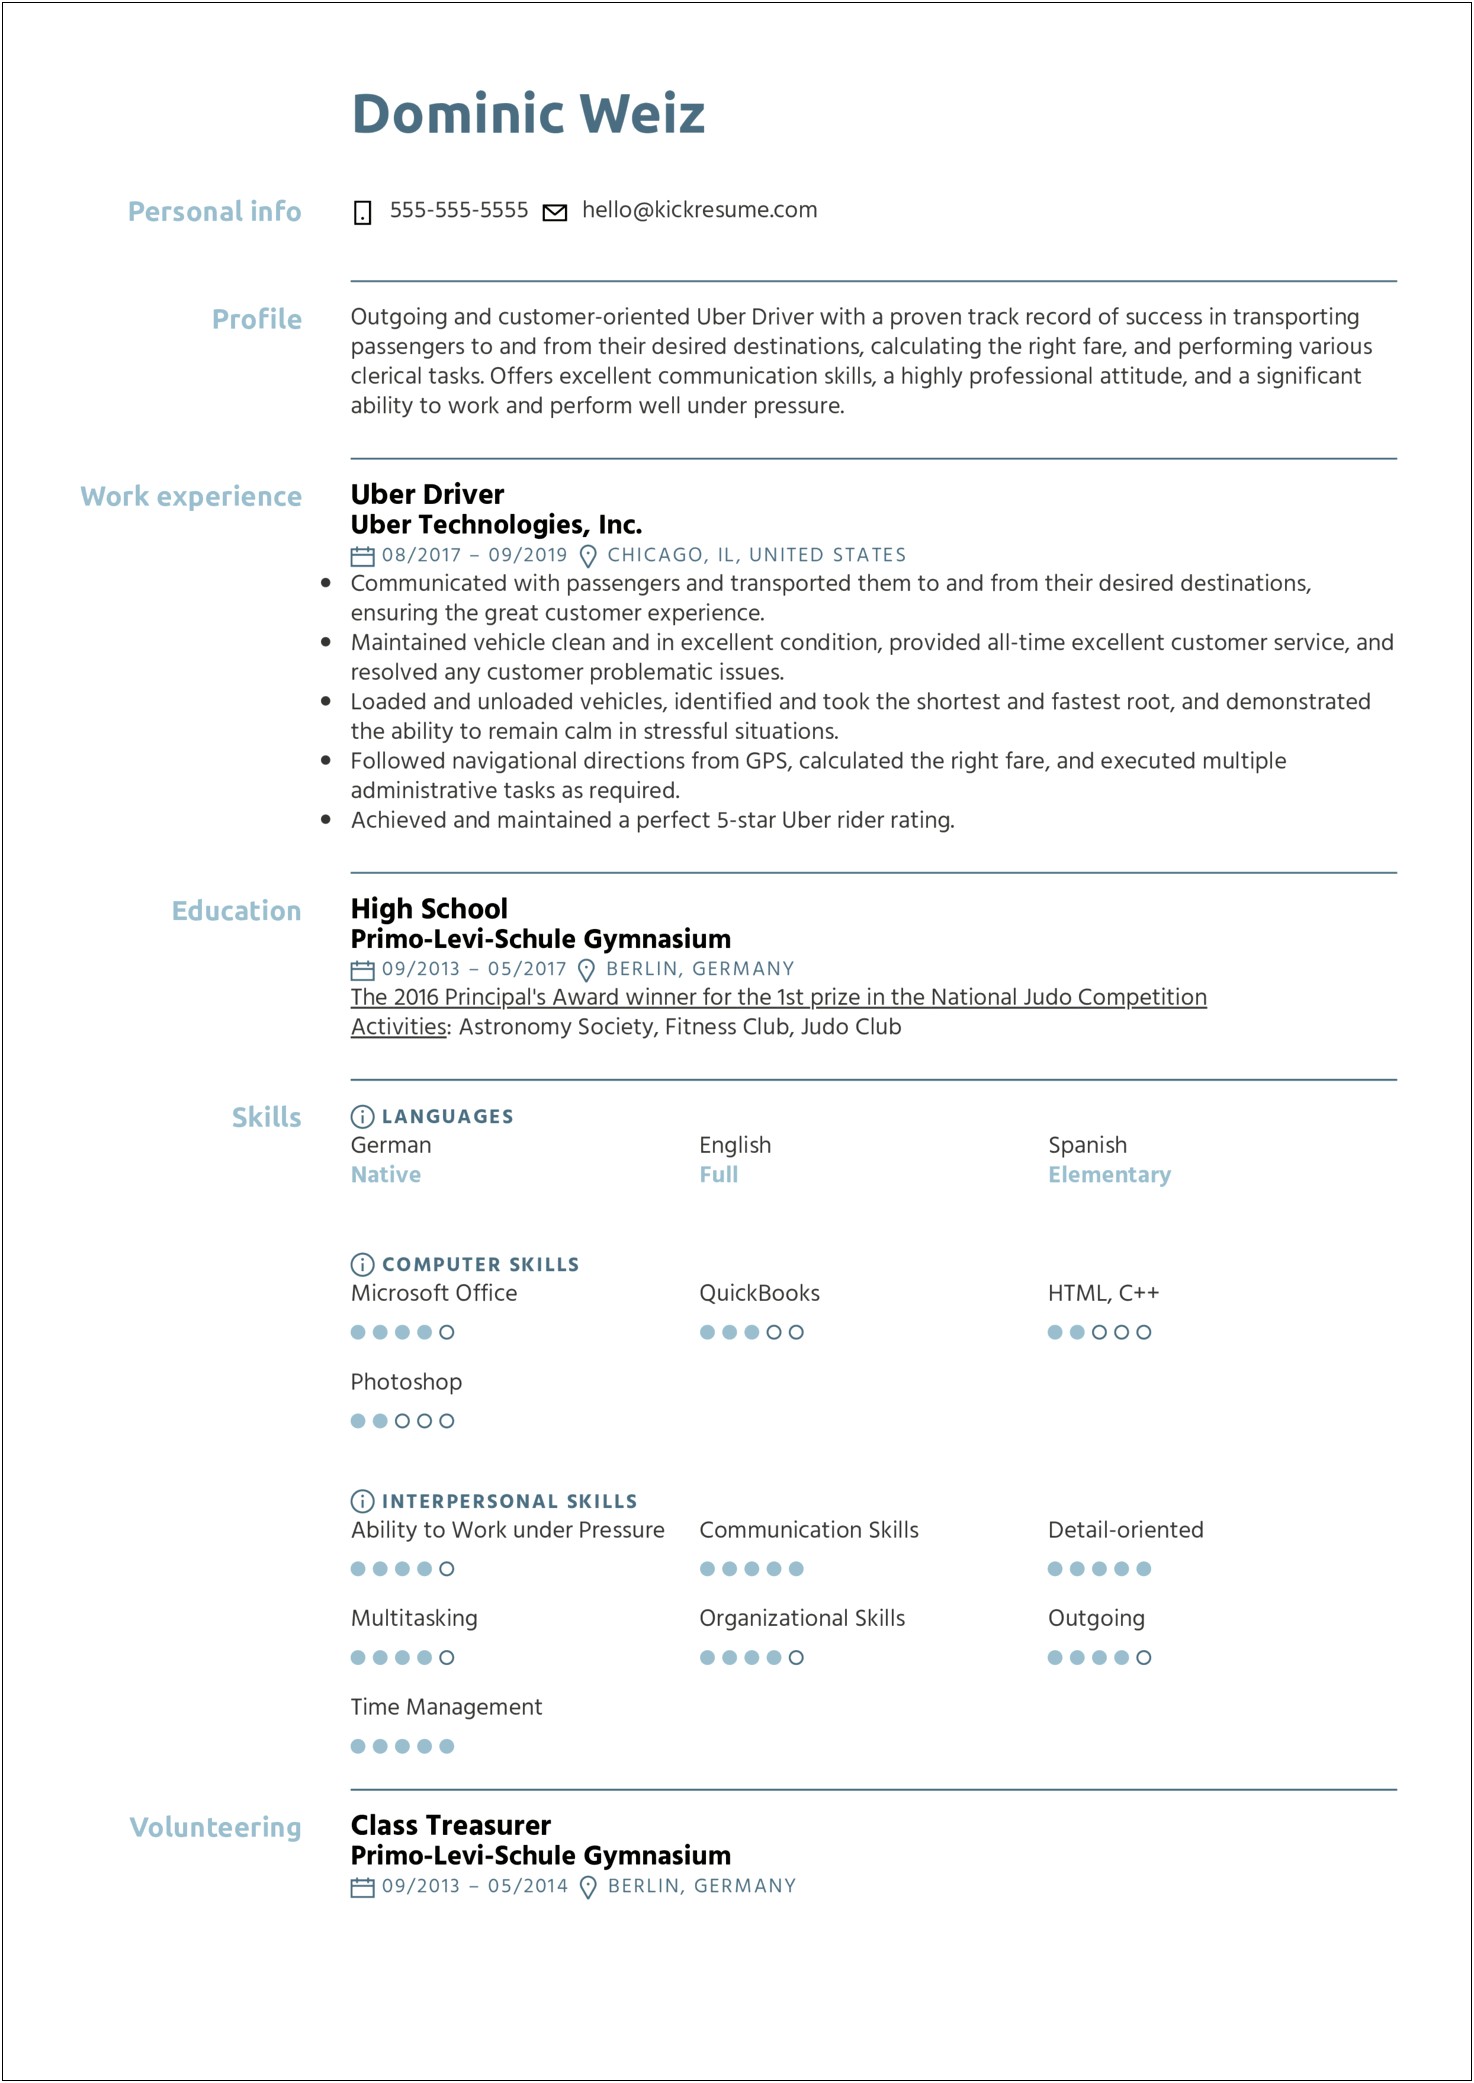 Sales Associate At Levi's Resume Example